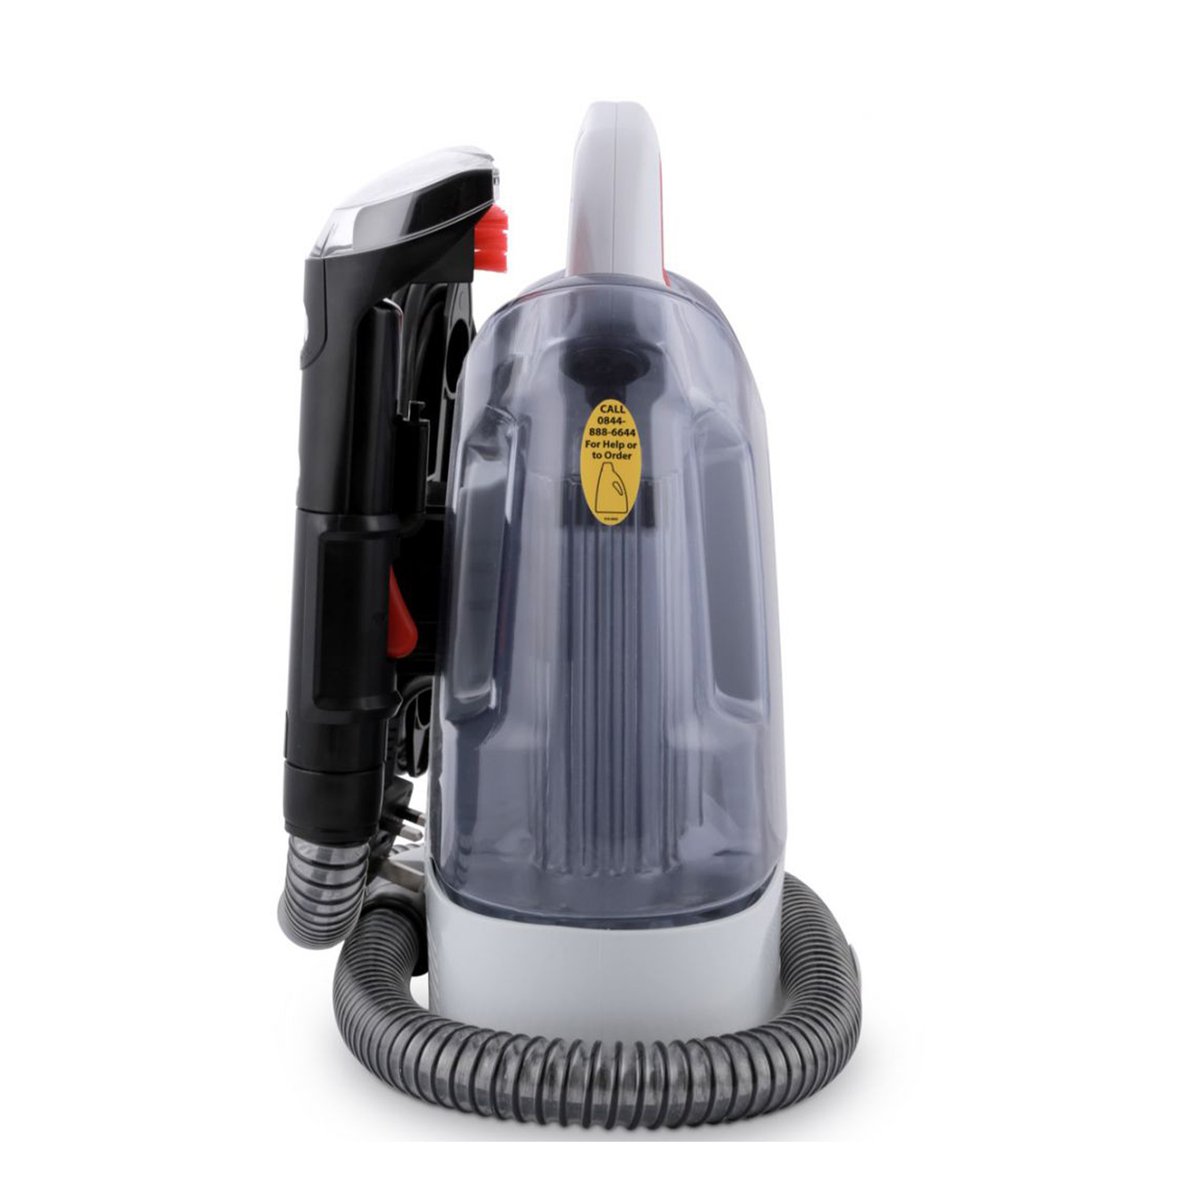 Bissell Spotclean Portable Spot Cleaner 3698E Demonstration & Review 